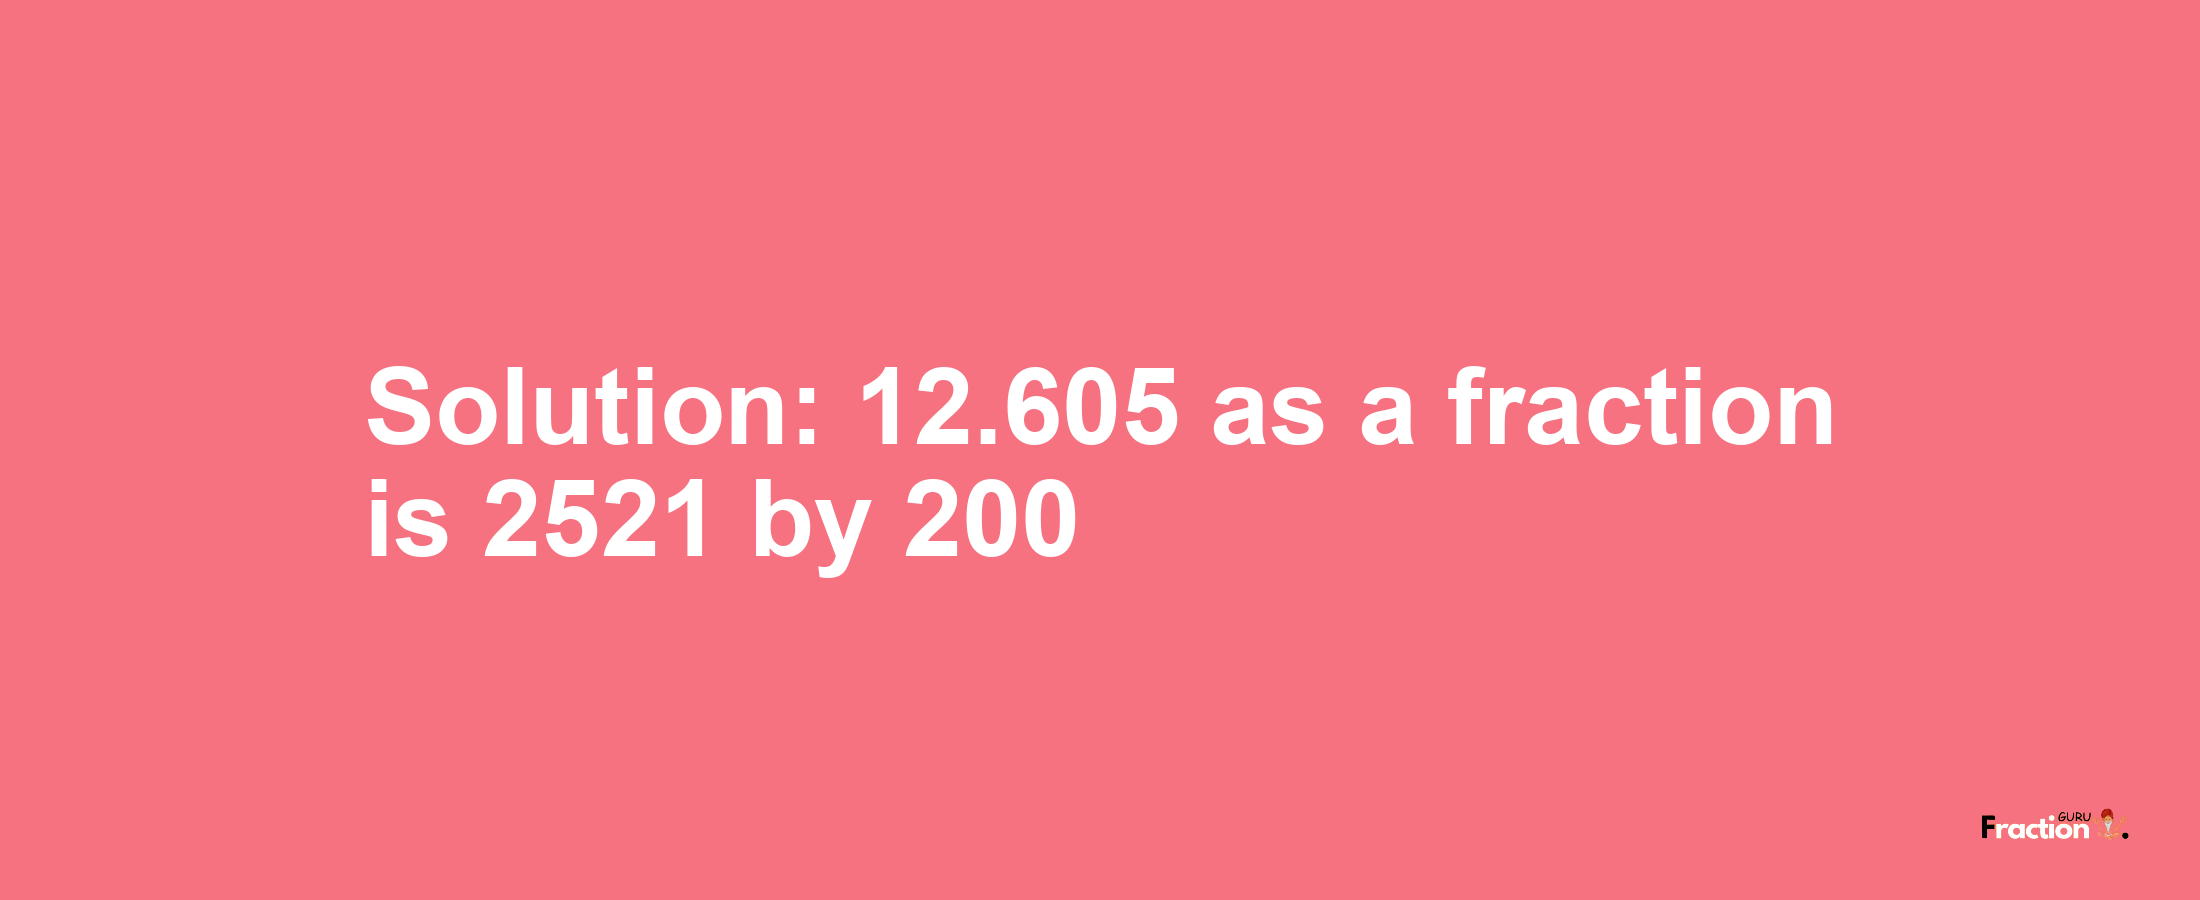 Solution:12.605 as a fraction is 2521/200